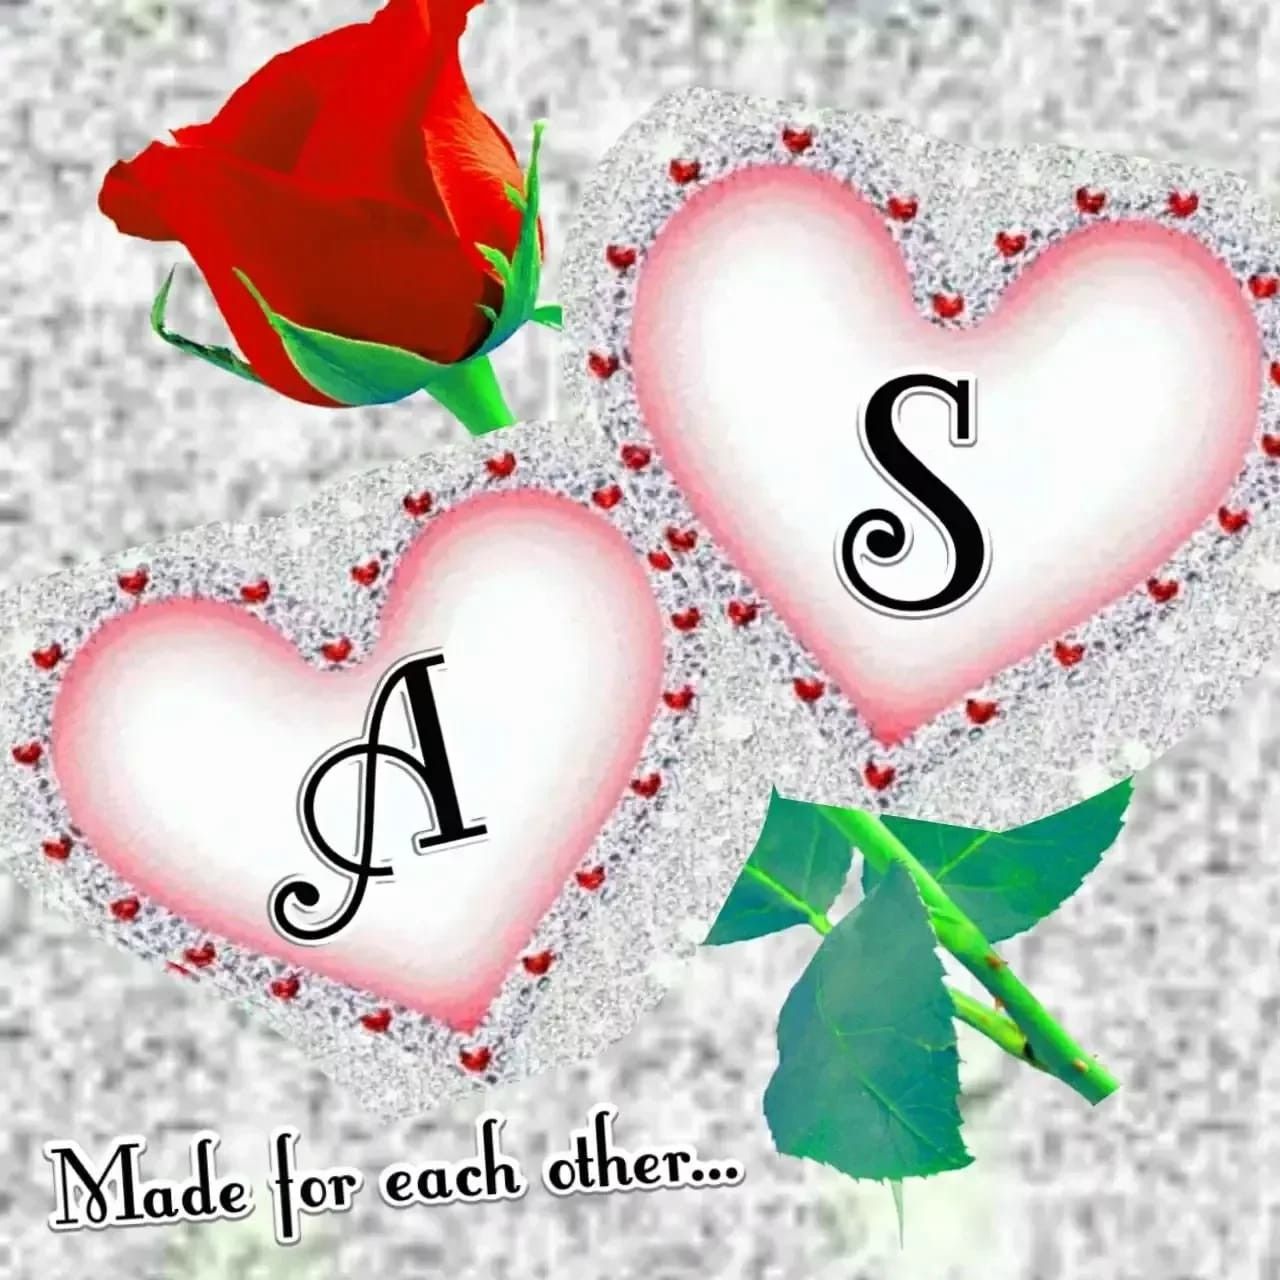 P by asim ali on my saves love couple wallpaper s love images love wallpapers romantic